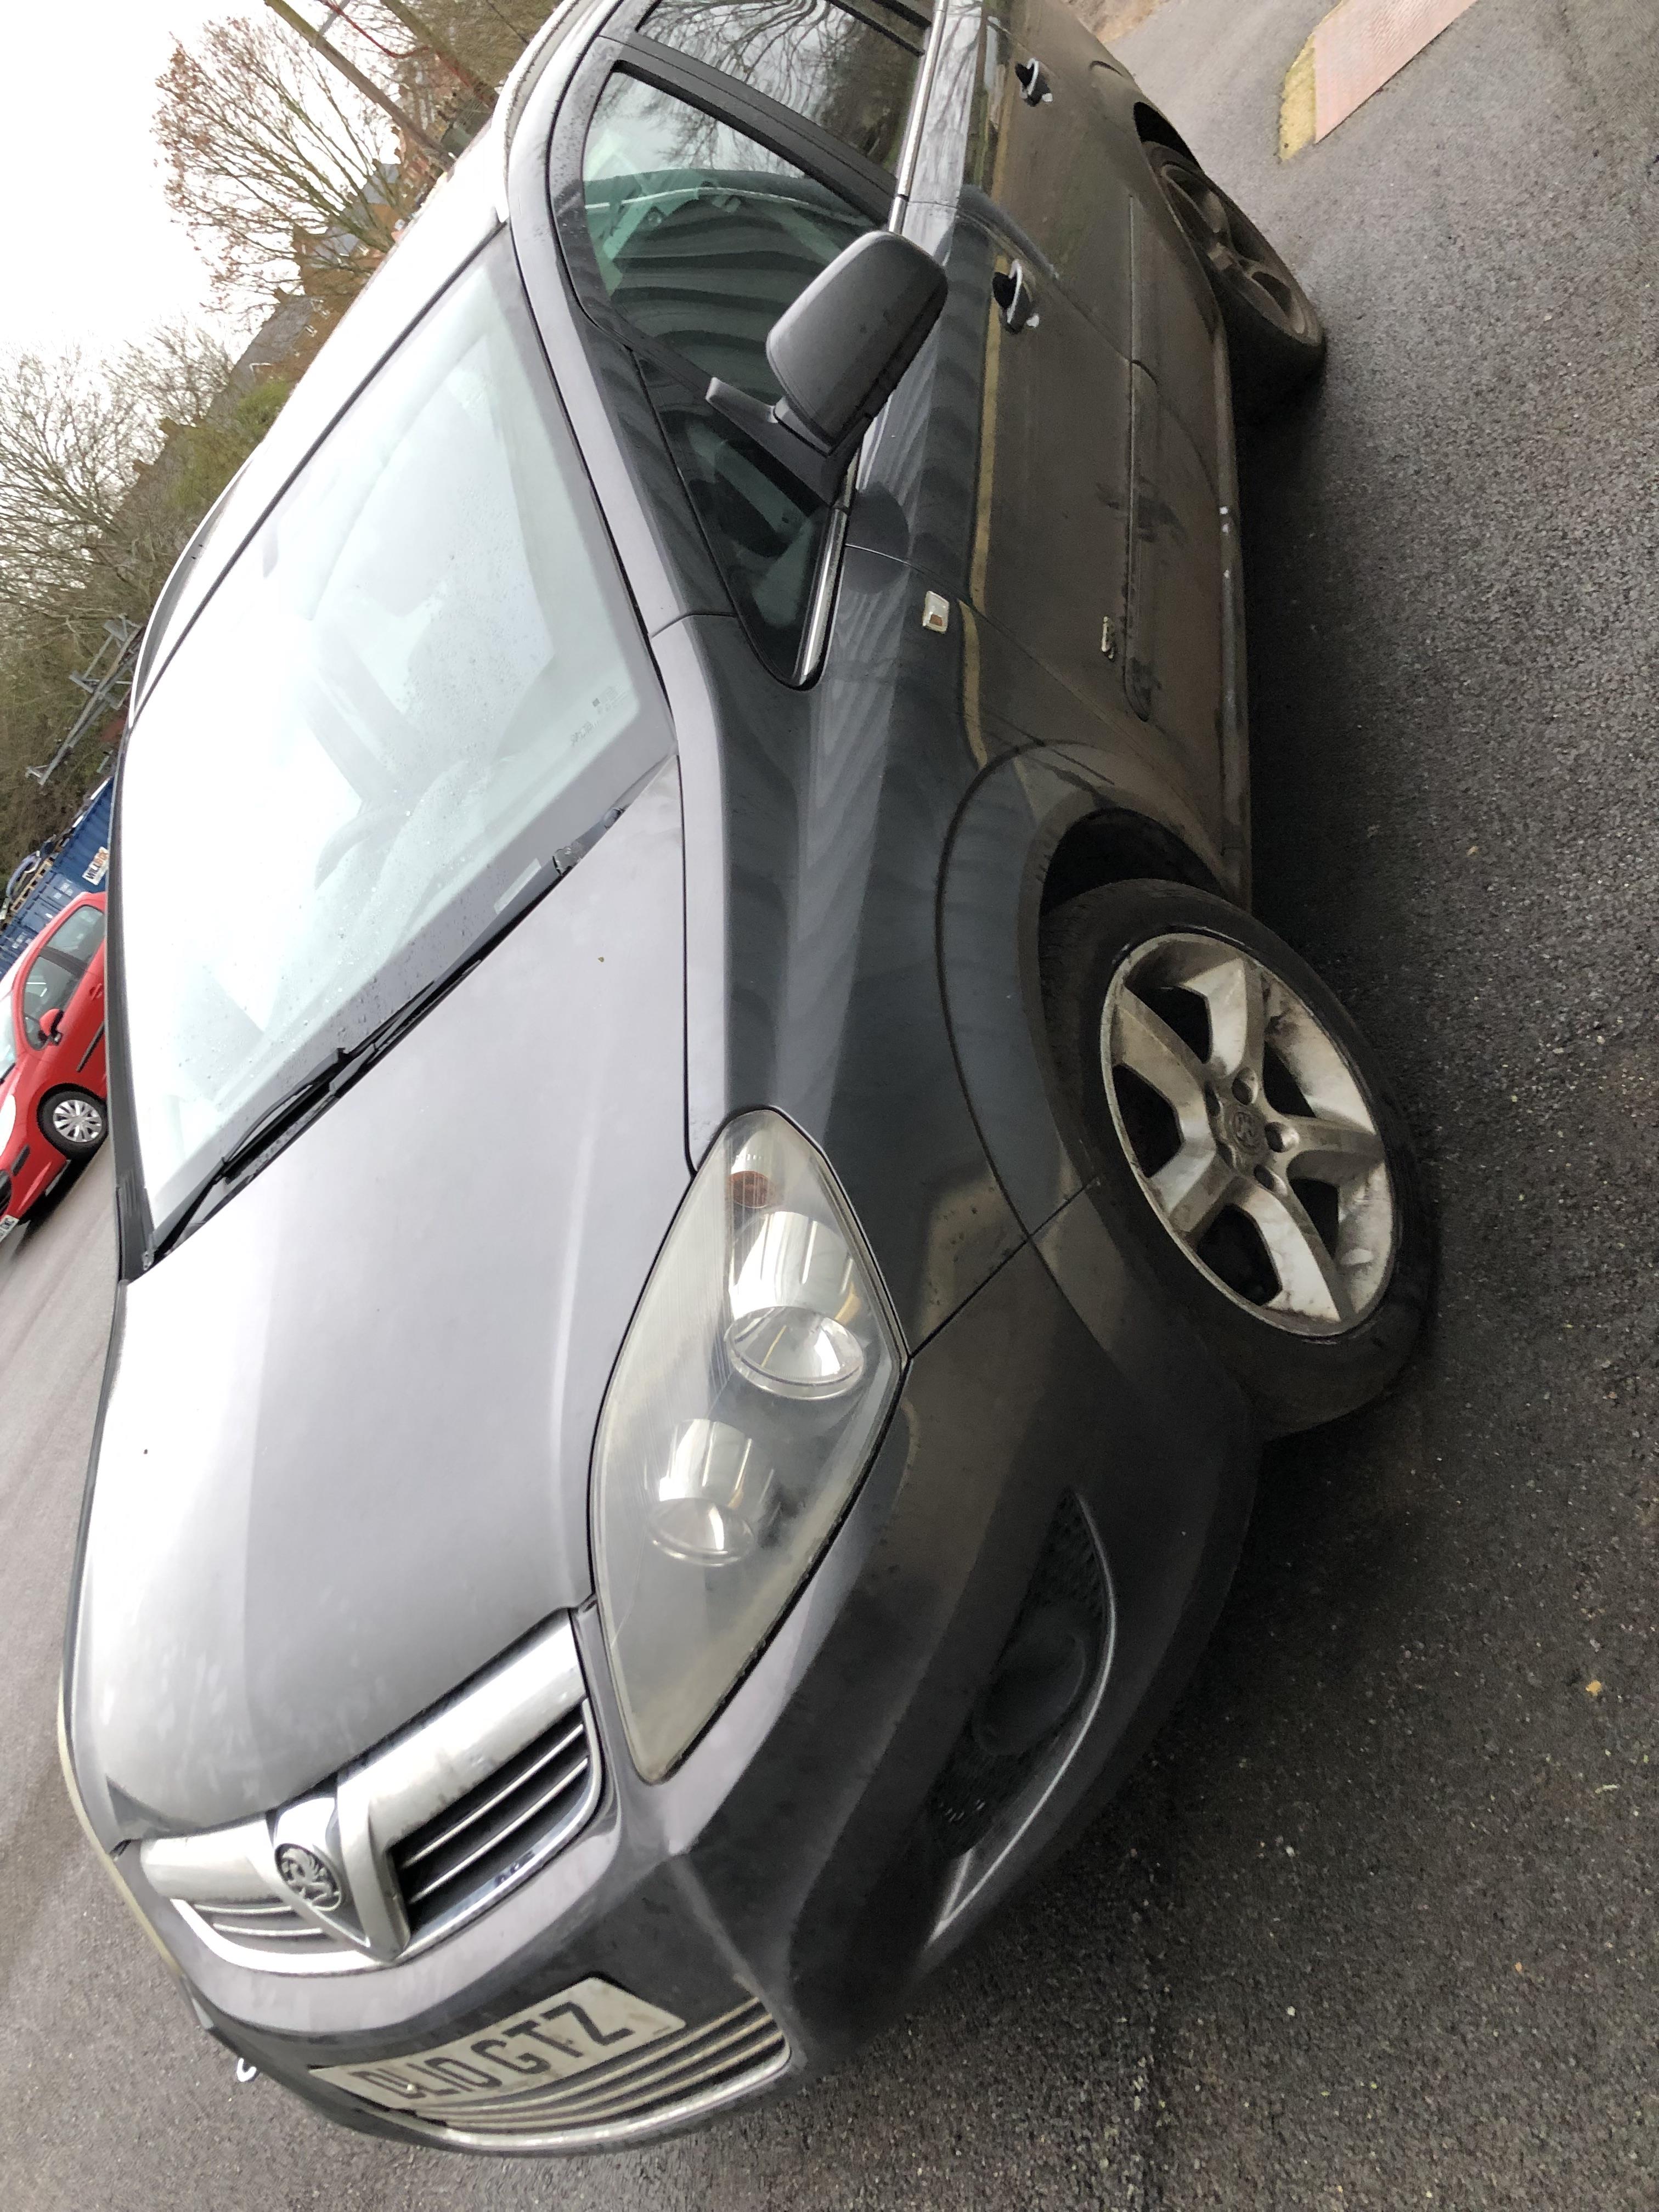 A 2010 VAUXHALL ZAFIRA 1.8 PETROL FOR SPARES OR REPAIRS (NON RUNNER) WITH 3+MONTHS MOT. - Image 3 of 11